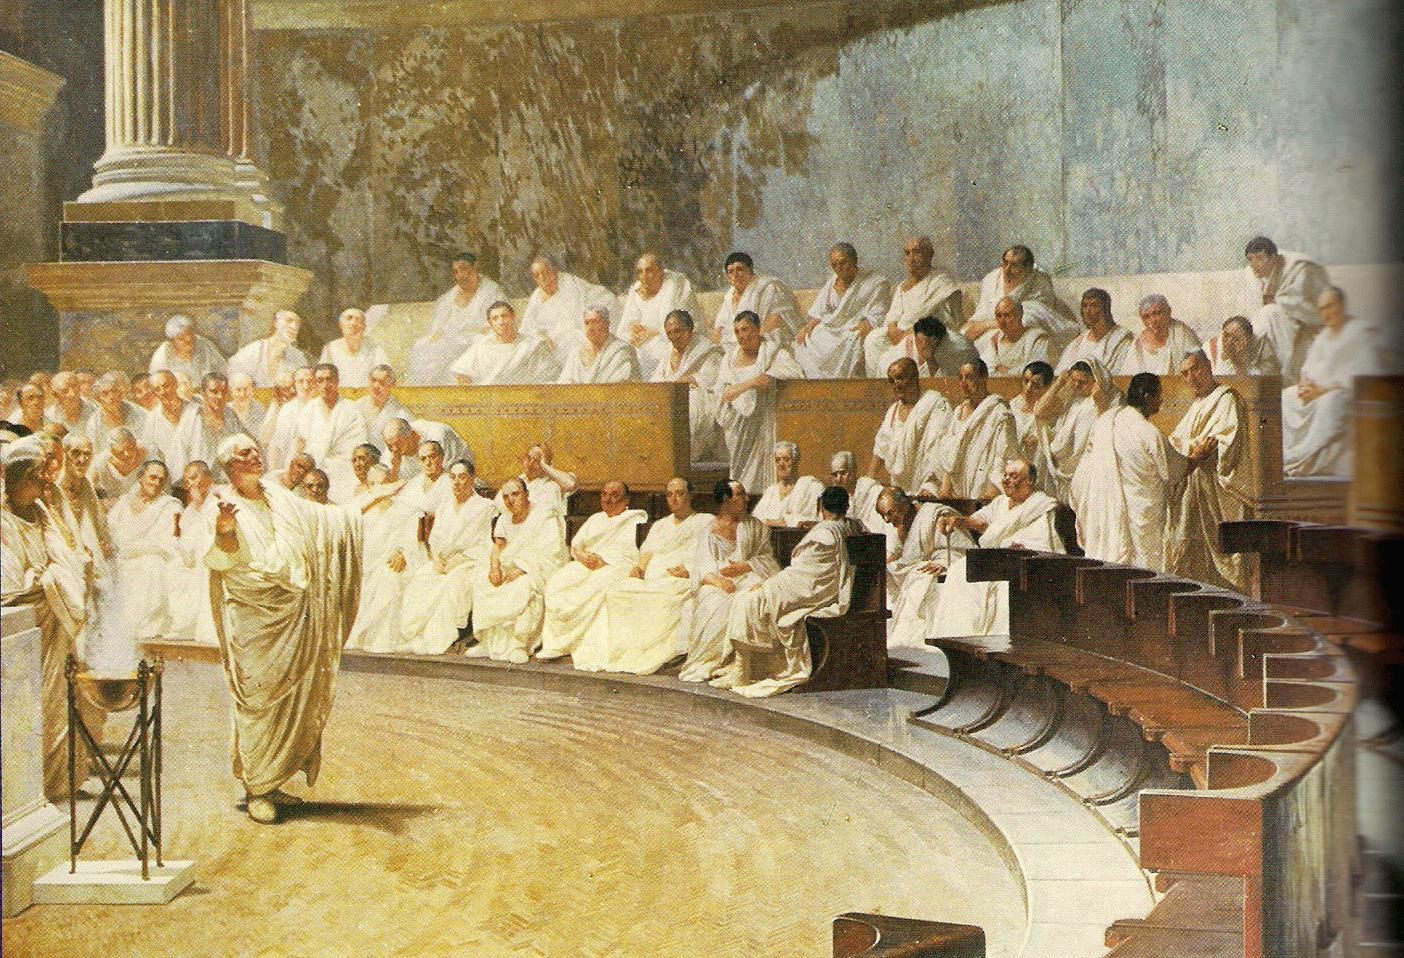 Elementary School Students Score Better Than Adults on This General Knowledge Quiz Roman Senate